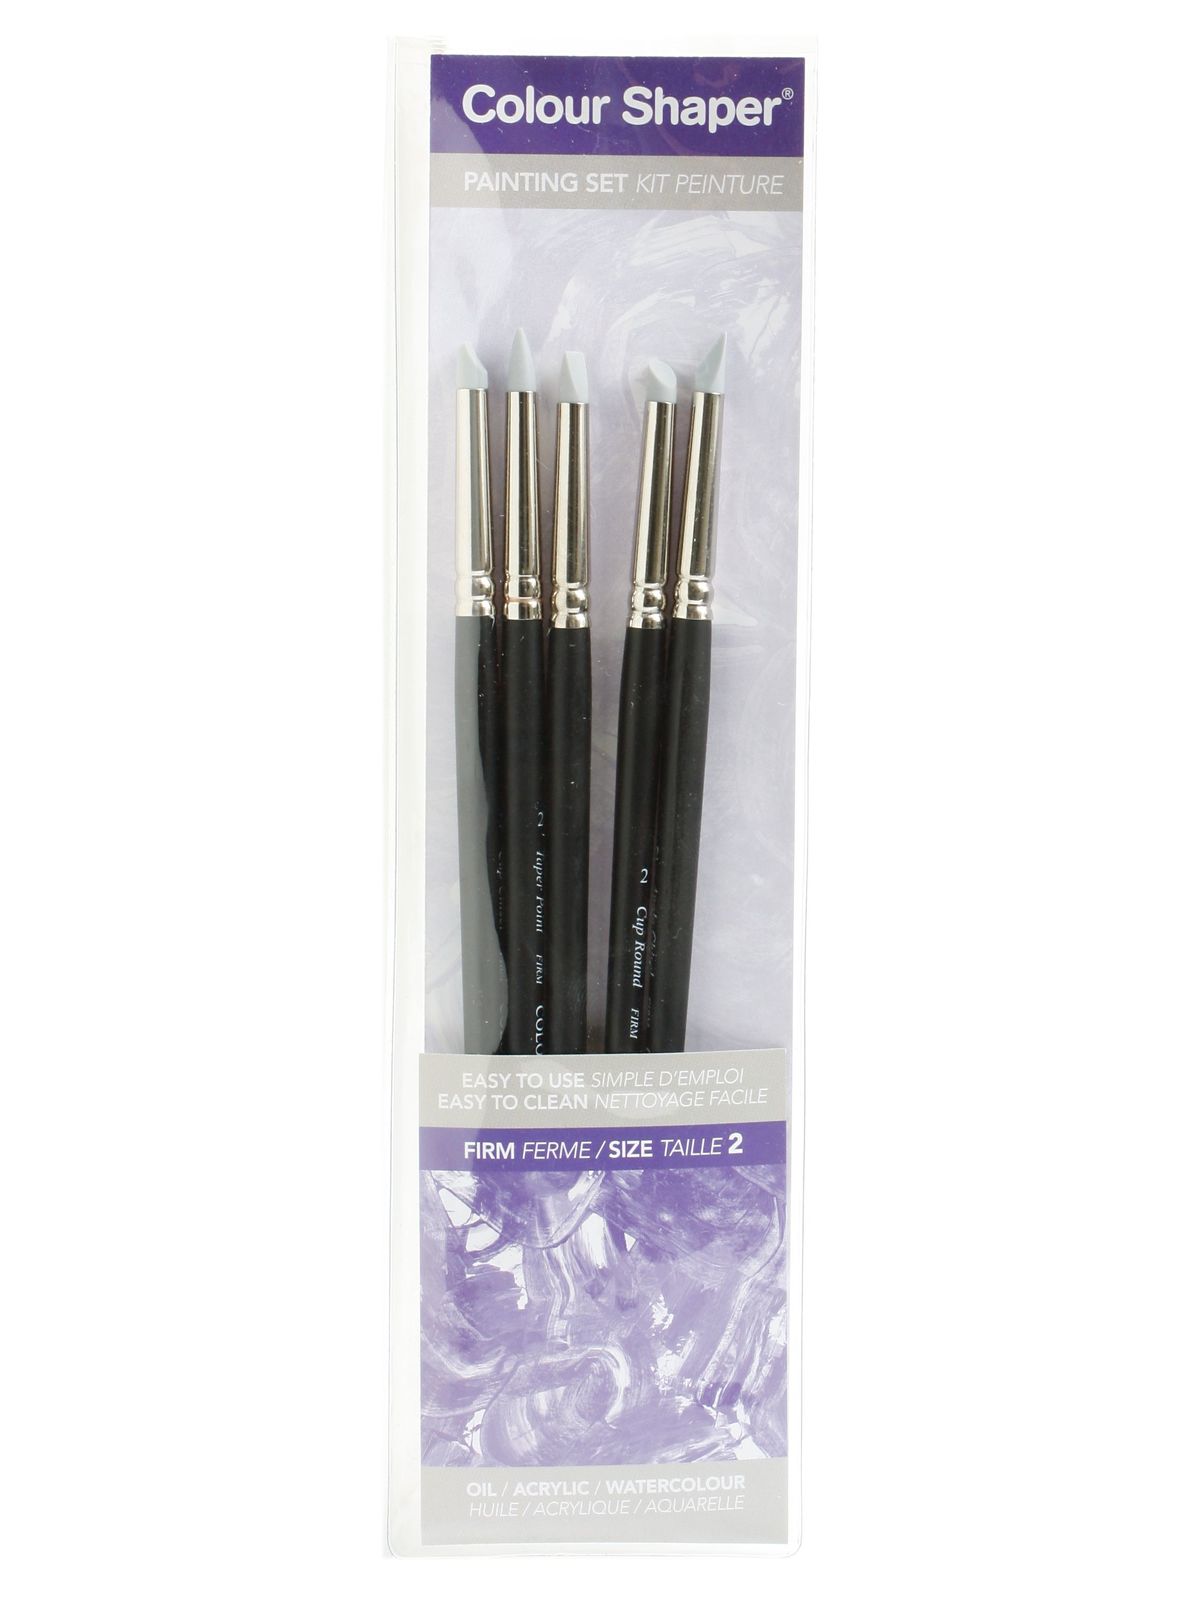 Painting Tool And Pastel Blending Sets Assorted Firm No. 2 Set Of 5